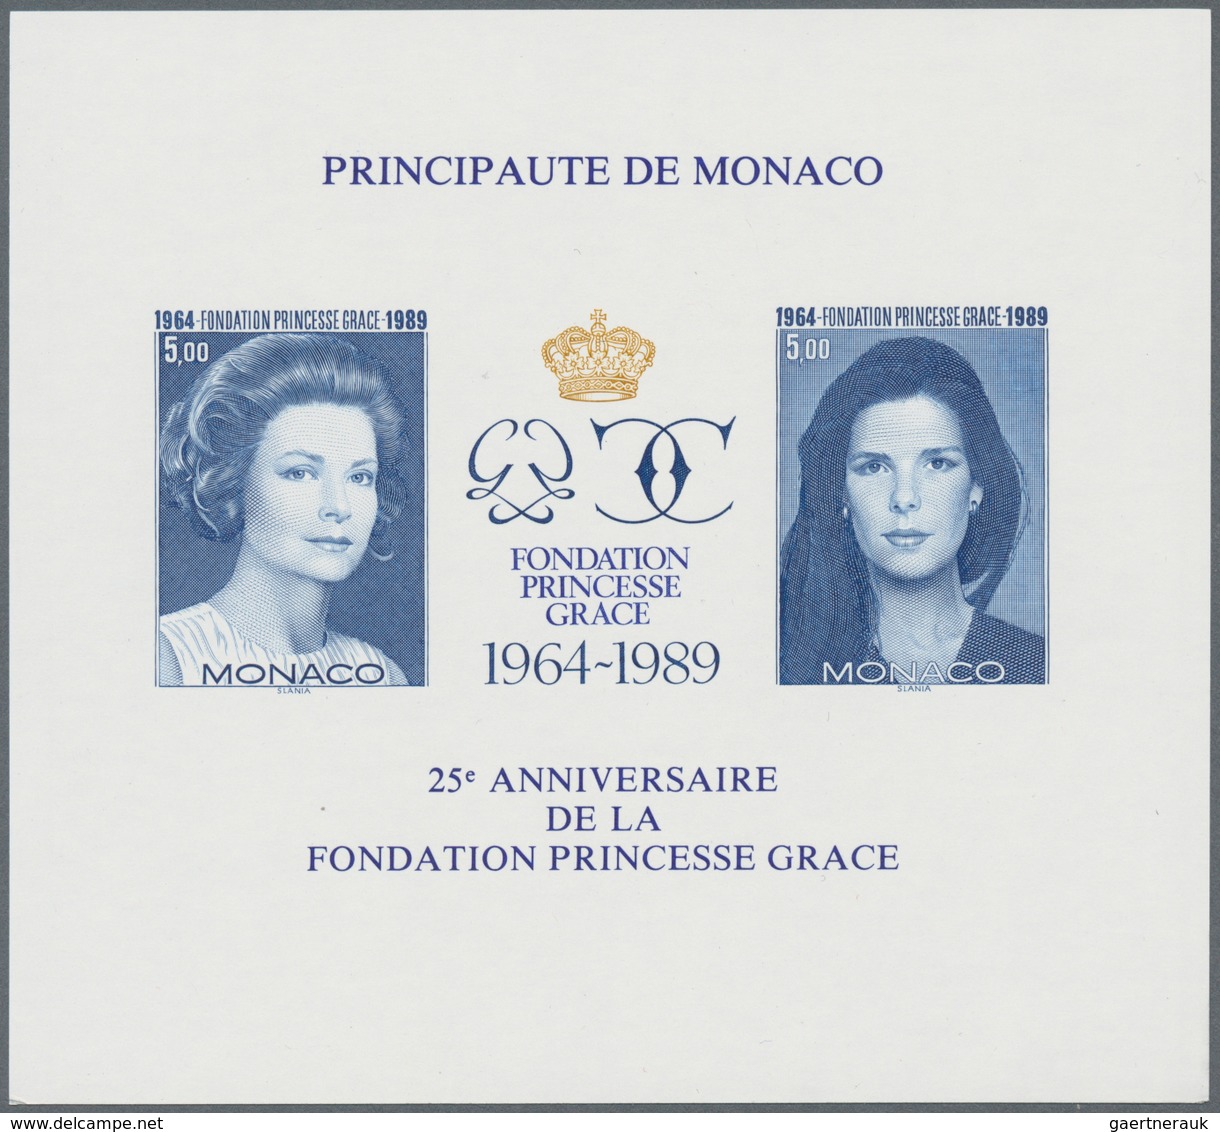 Monaco: 1938/1994, accumulation with 453 MINIATURE SHEETS incl. a nice part IMPERFORATE and SPECIAL